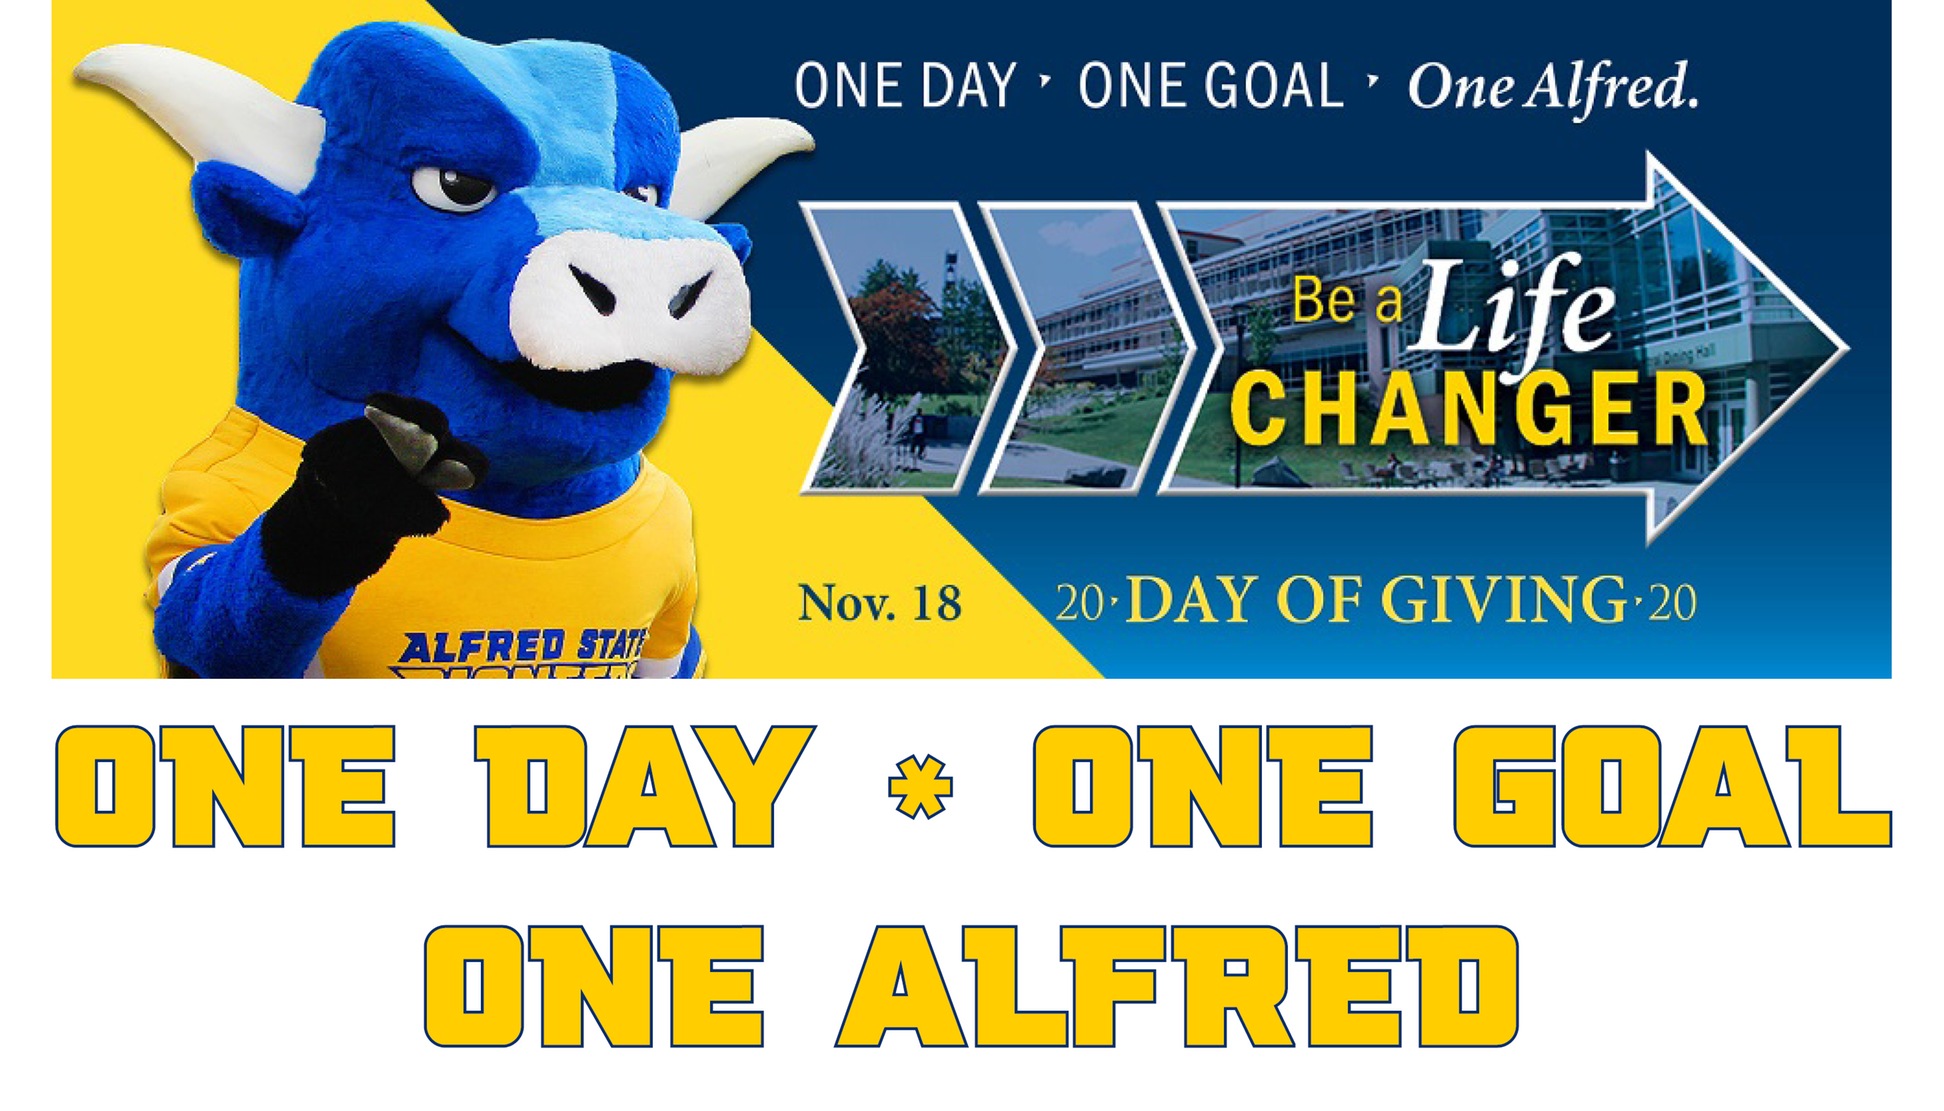 Day of Giving image featuring college mascot Big Blue